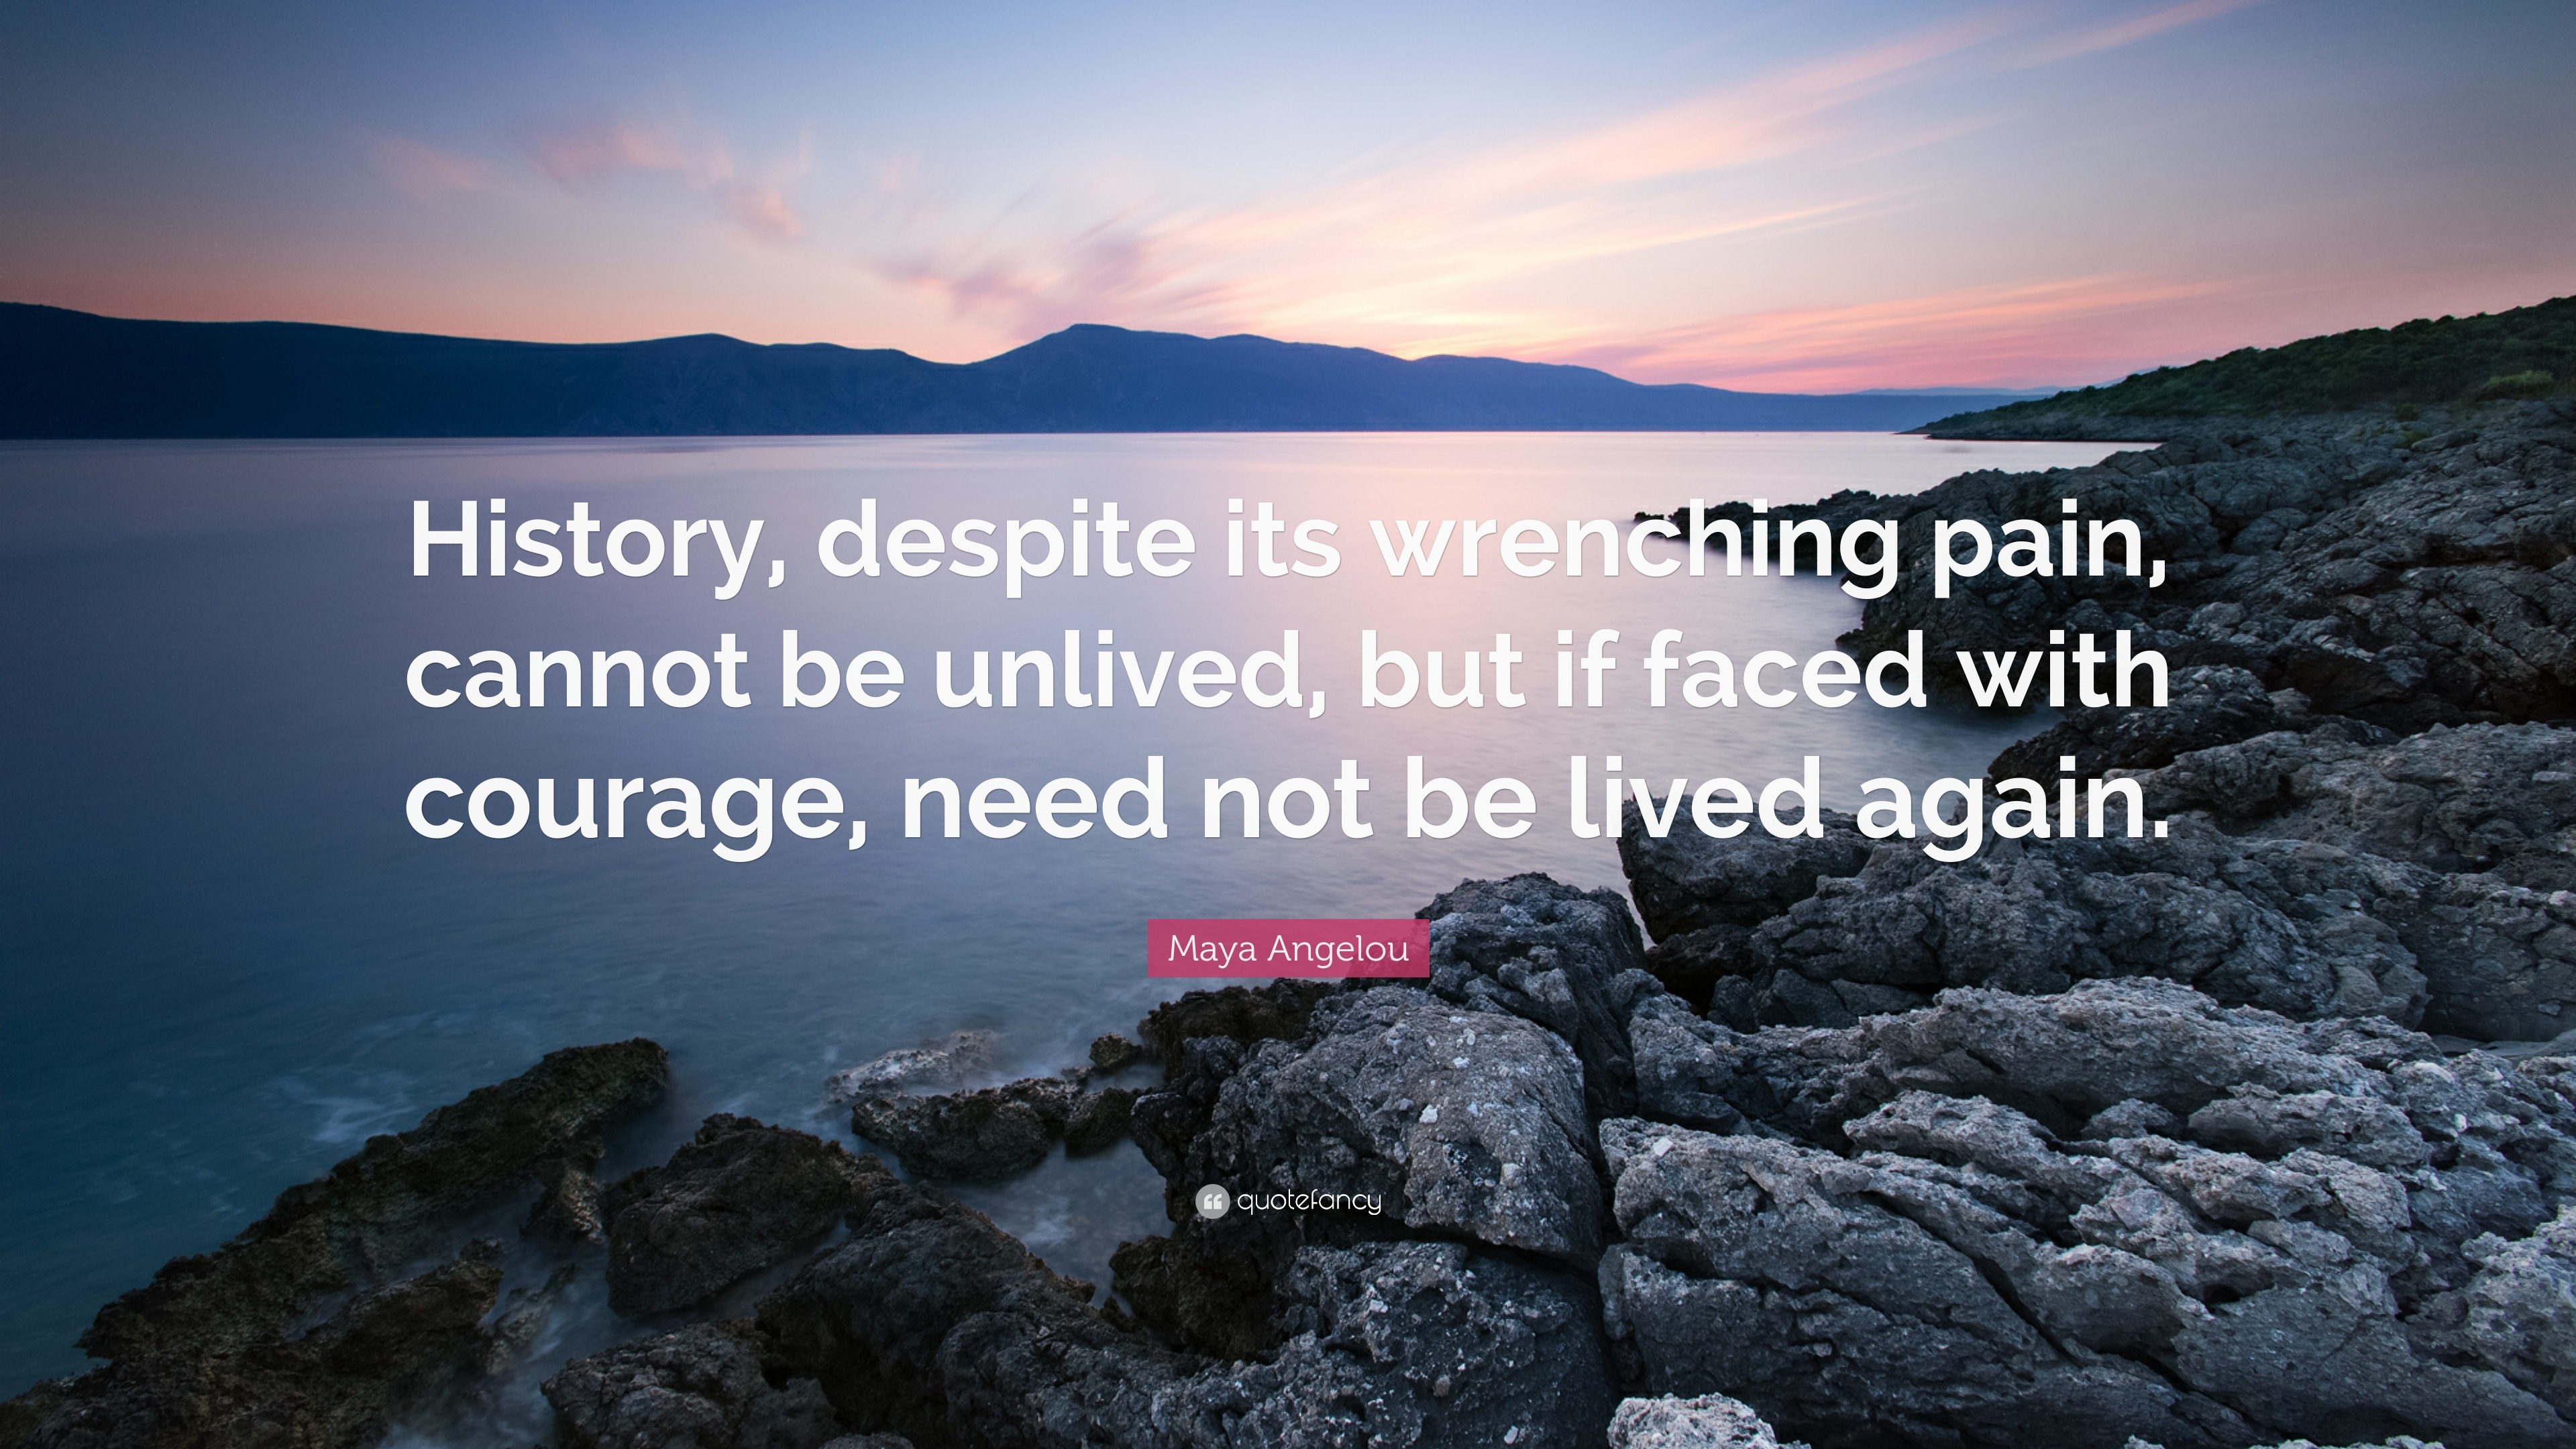 1713588 Maya Angelou Quote History despite its wrenching pain cannot be